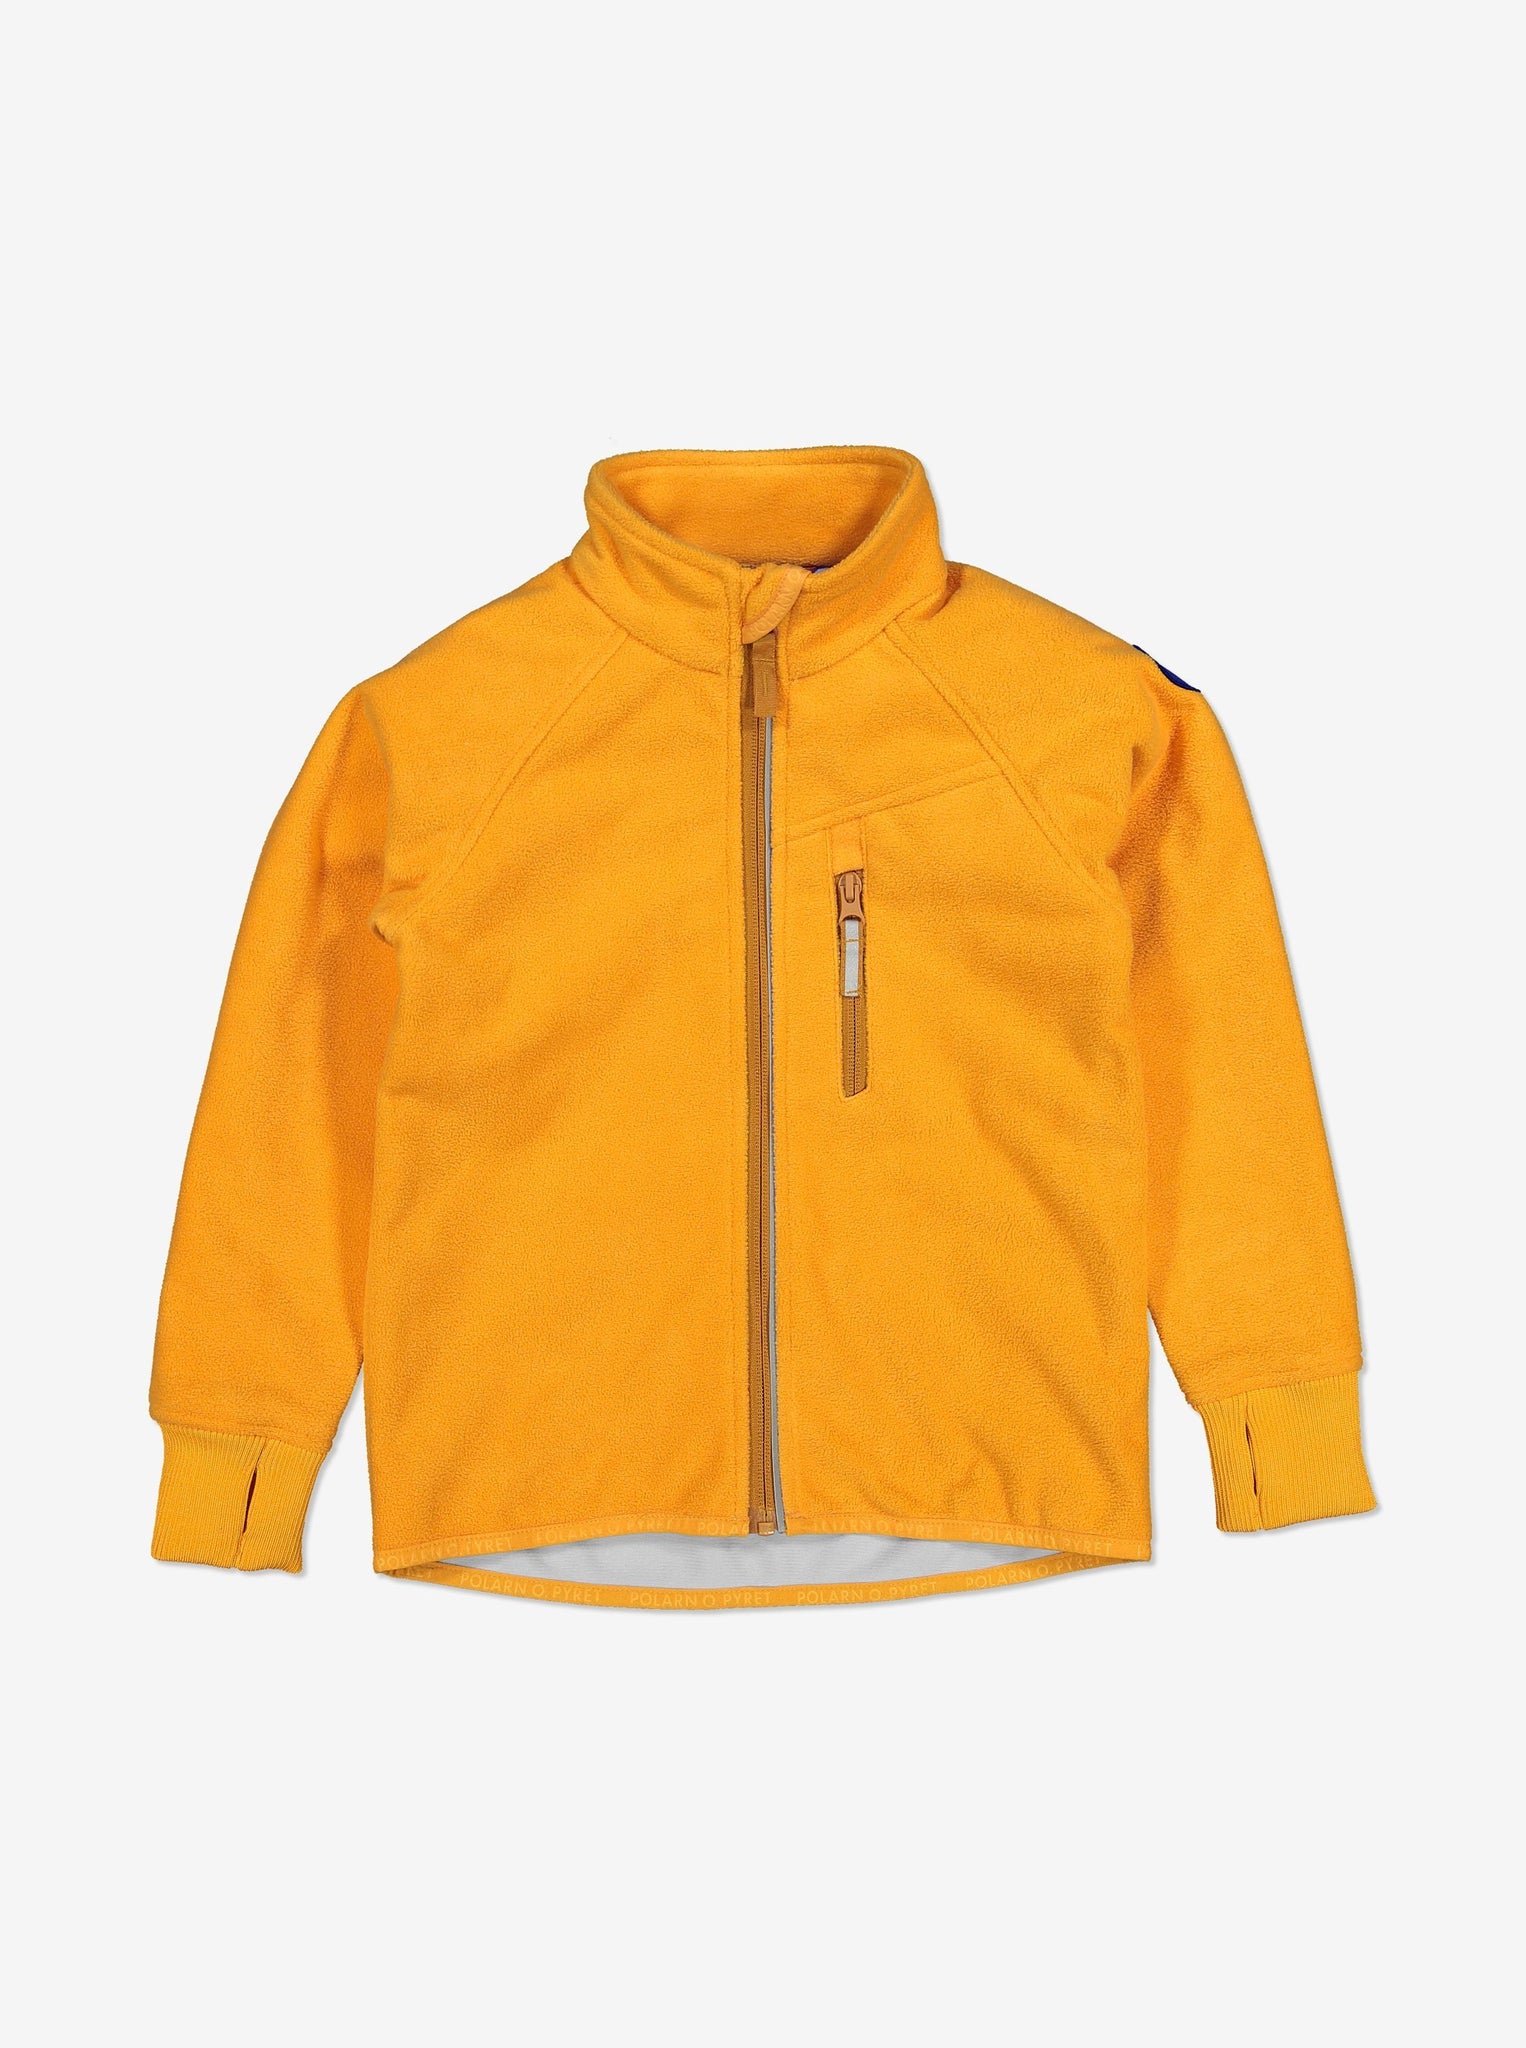 Yellow, kids waterproof fleece jacket with reflector zips and cuff thumbholes, made of breathable and soft fabric.